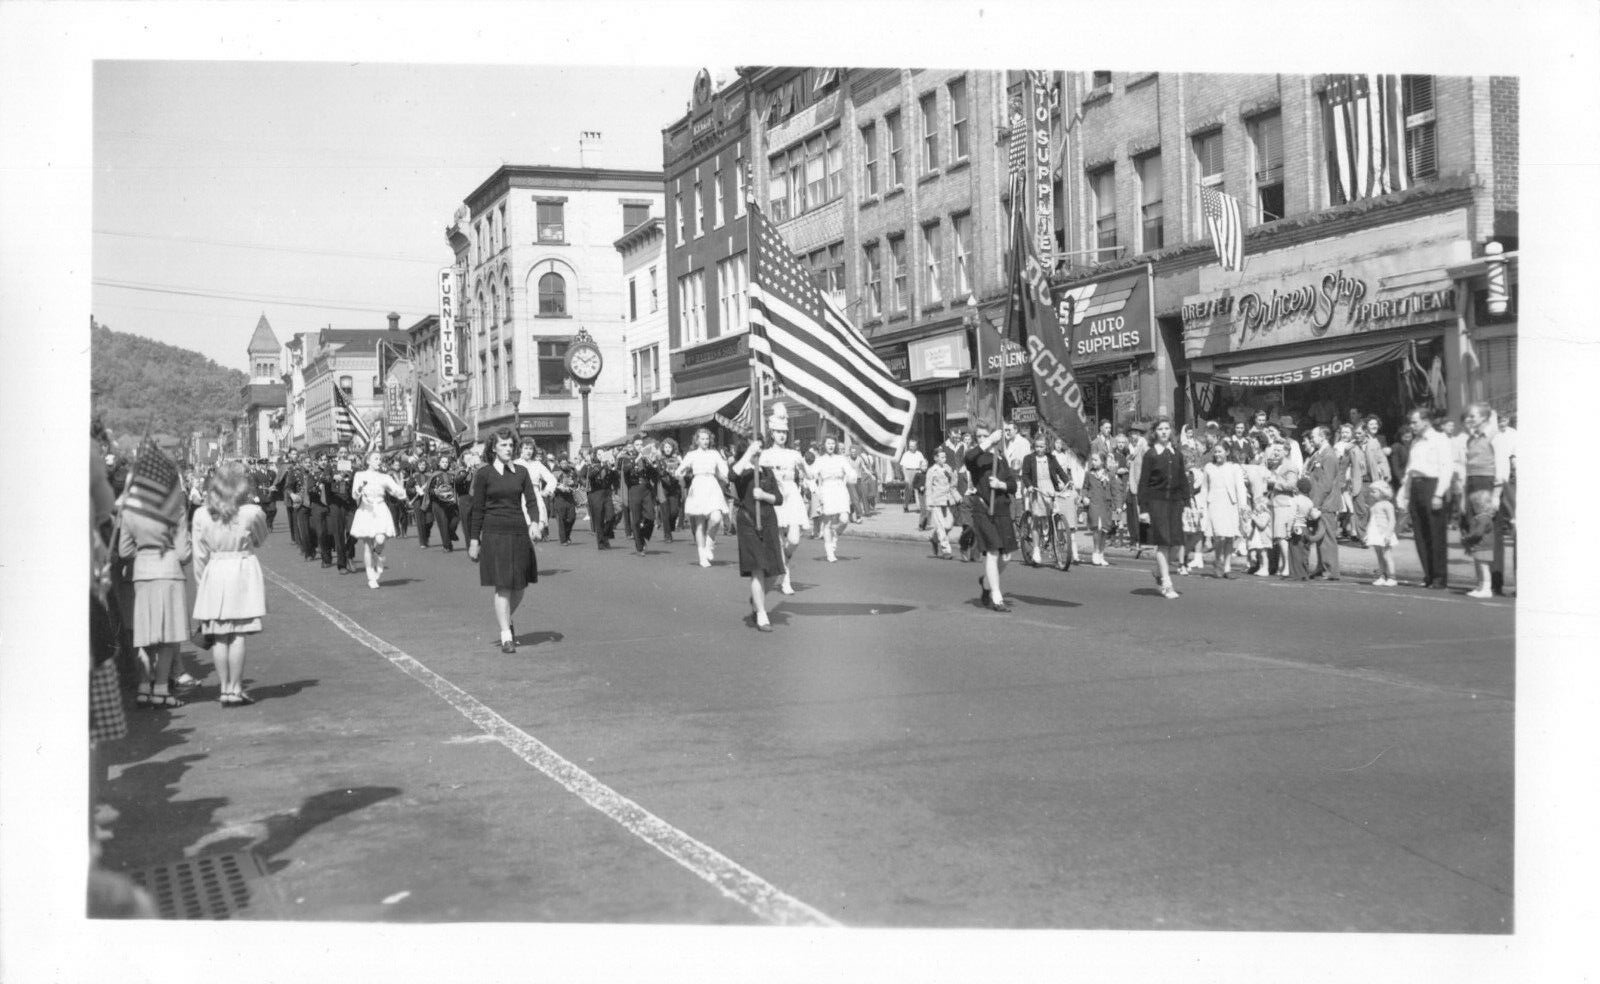 Drum & Bugle Corps School Parade Downtown Flags Black White Snapshot Photograph